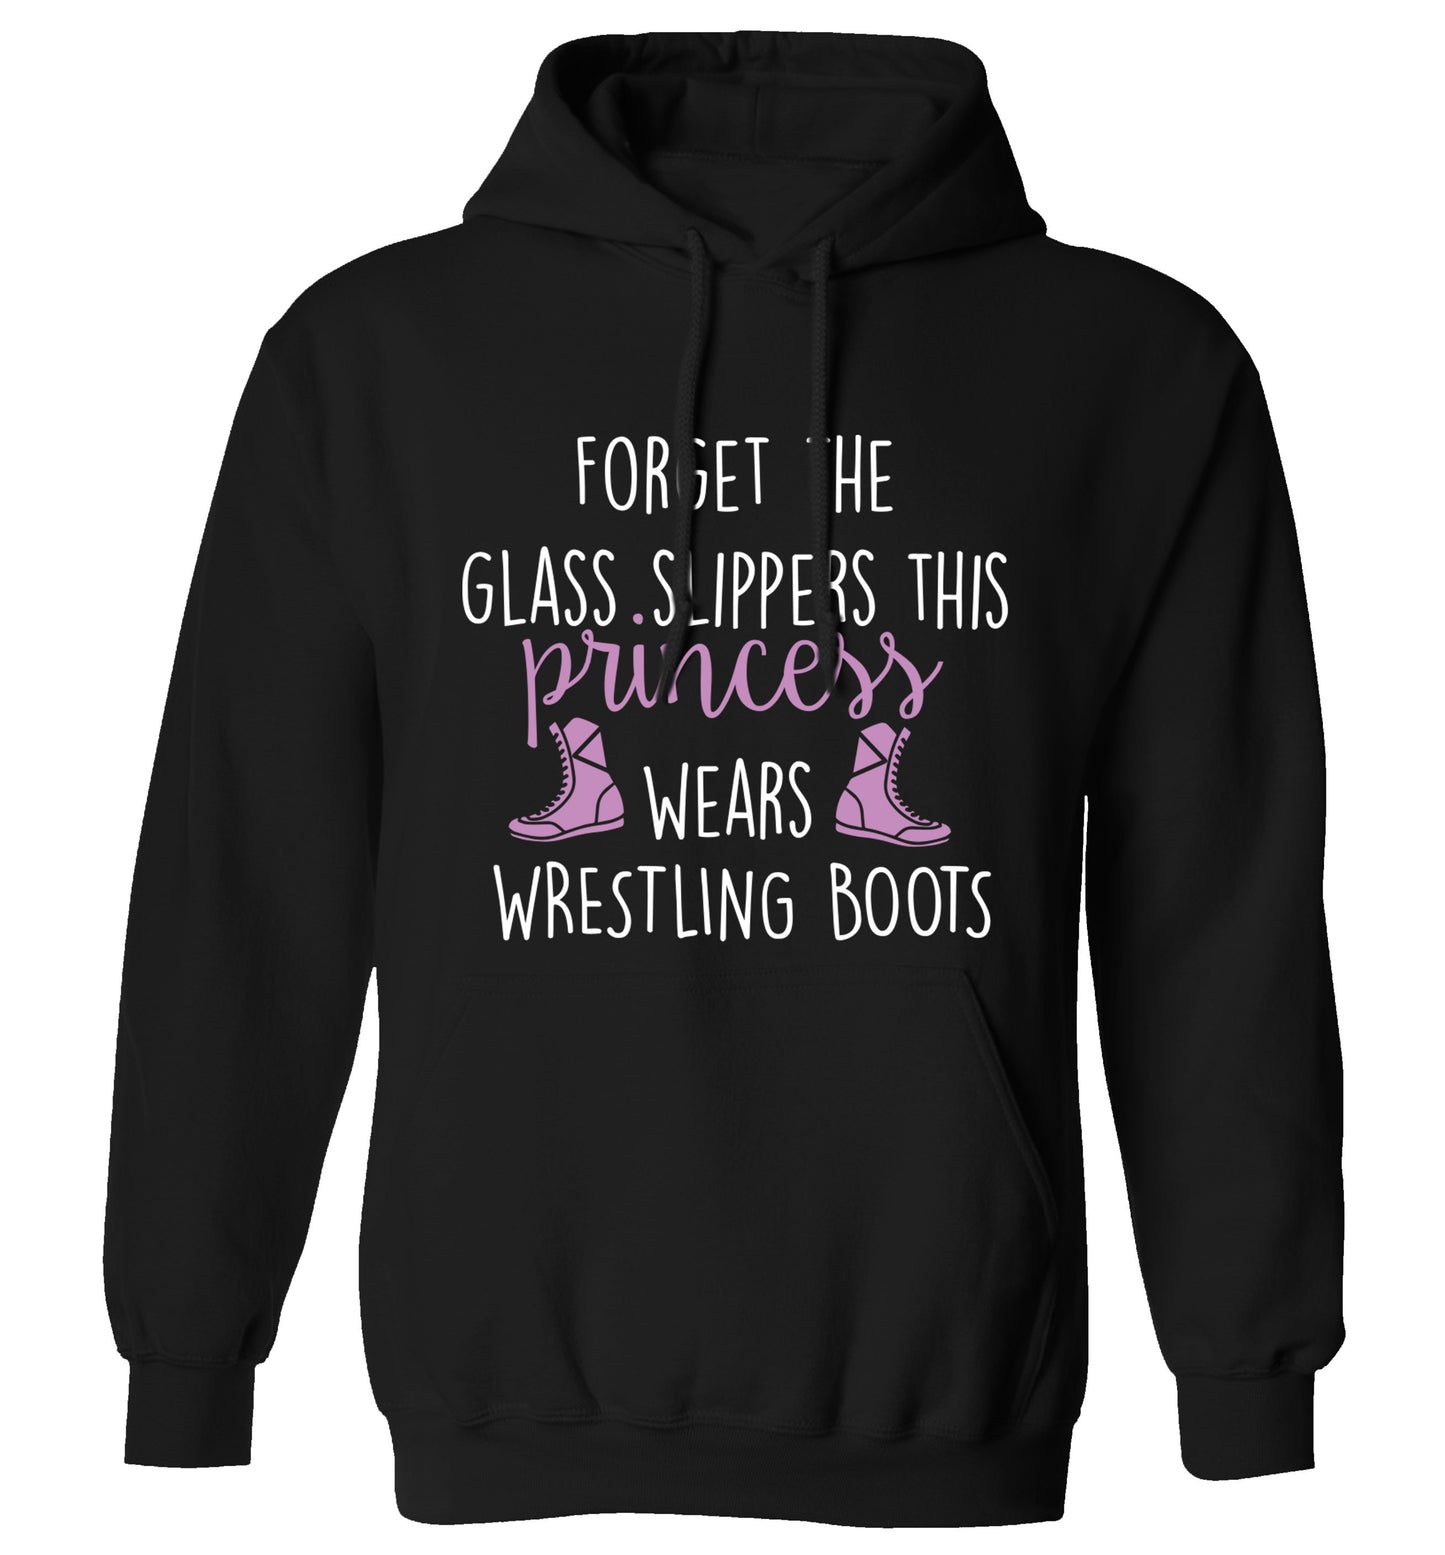 Forget the glass slippers this princess wears wrestling boots adults unisex black hoodie 2XL